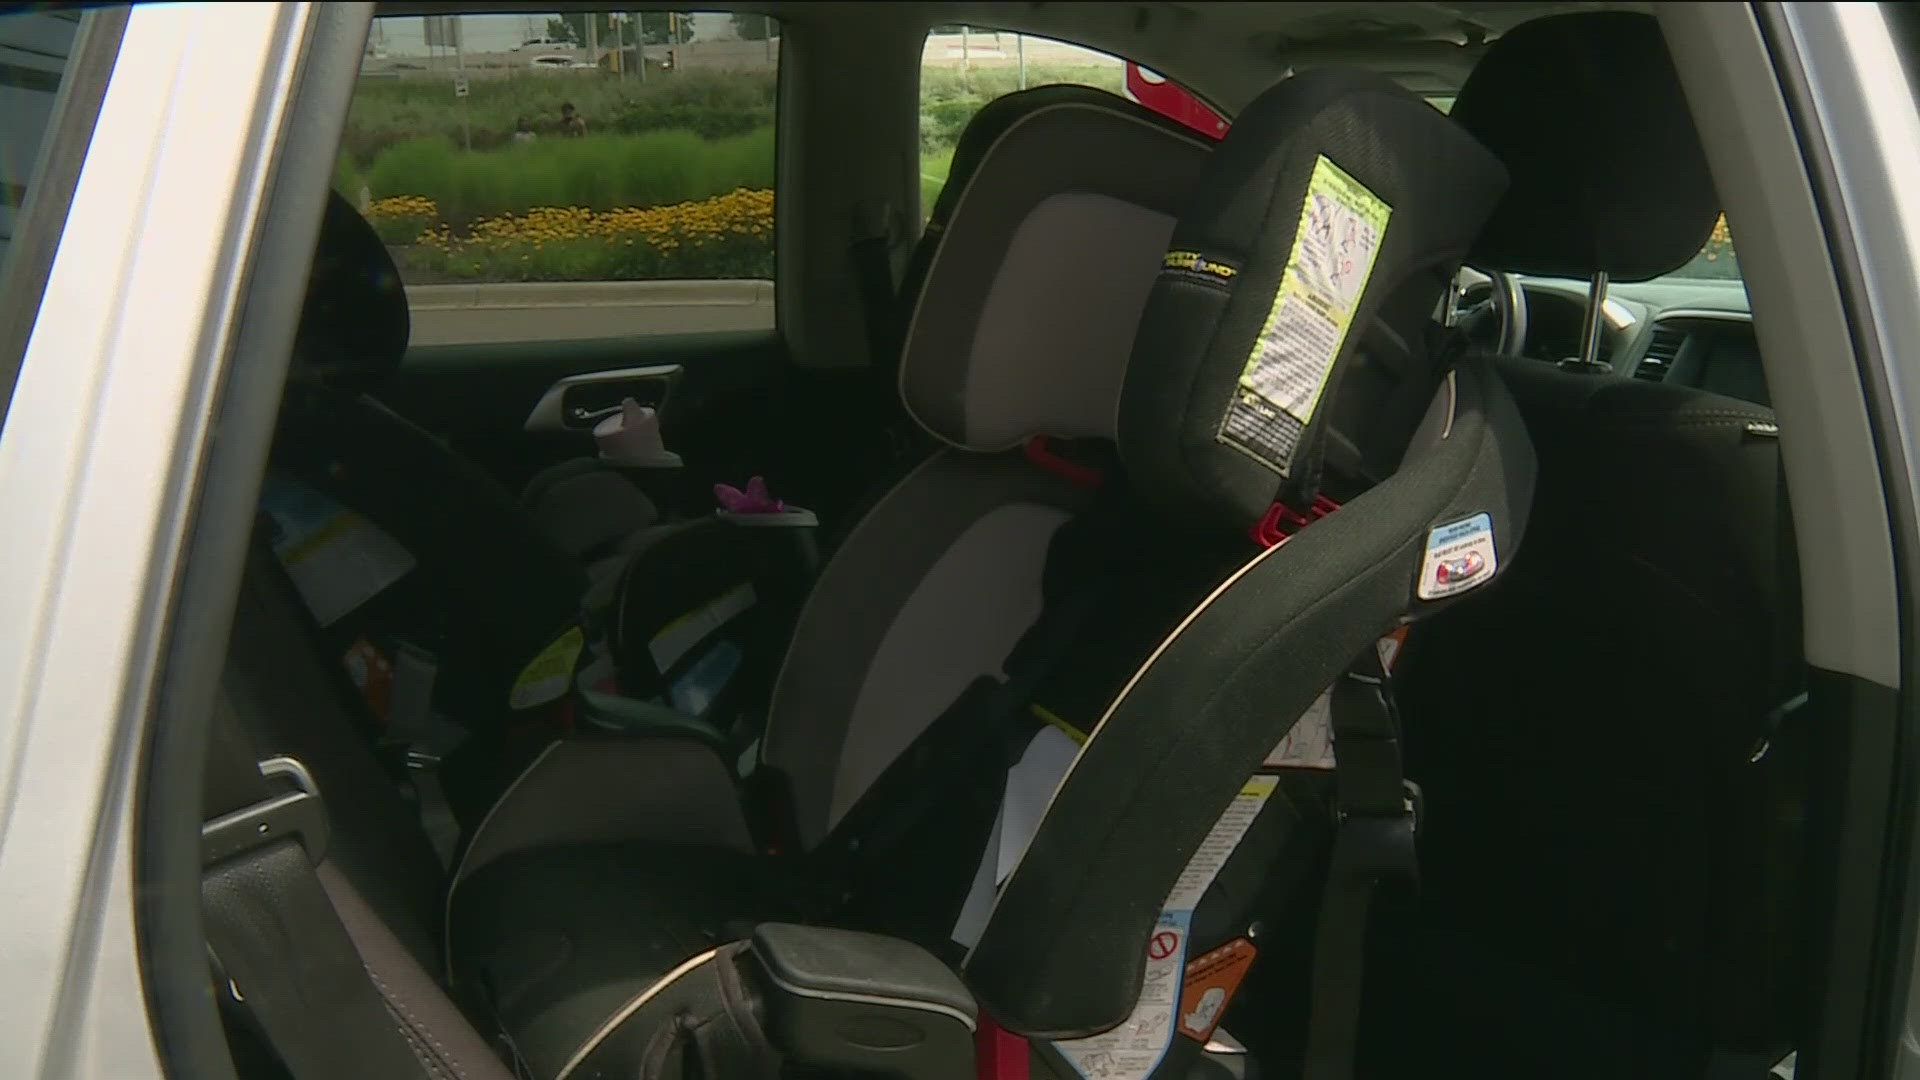 The Minnesota Child Passenger Safety Law goes into effect August 1st, bringing new guidance on child car seats, booster seats and seat belts for kiddos.